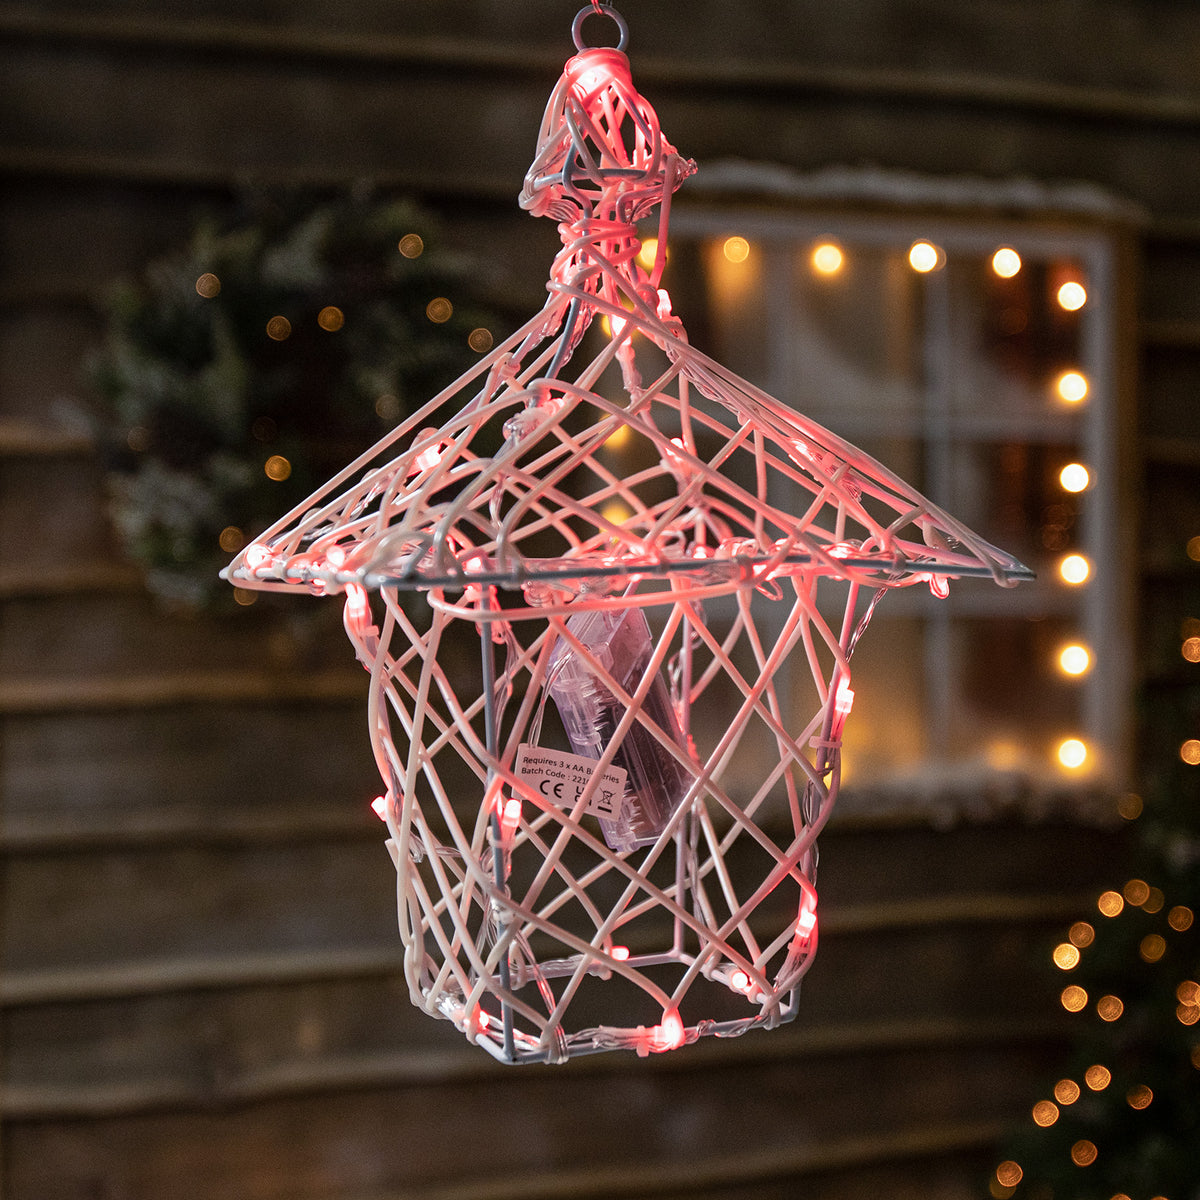 35CM Colour Changeable White Wicker Christmas Lantern with 40 LEDS -Battery Operated